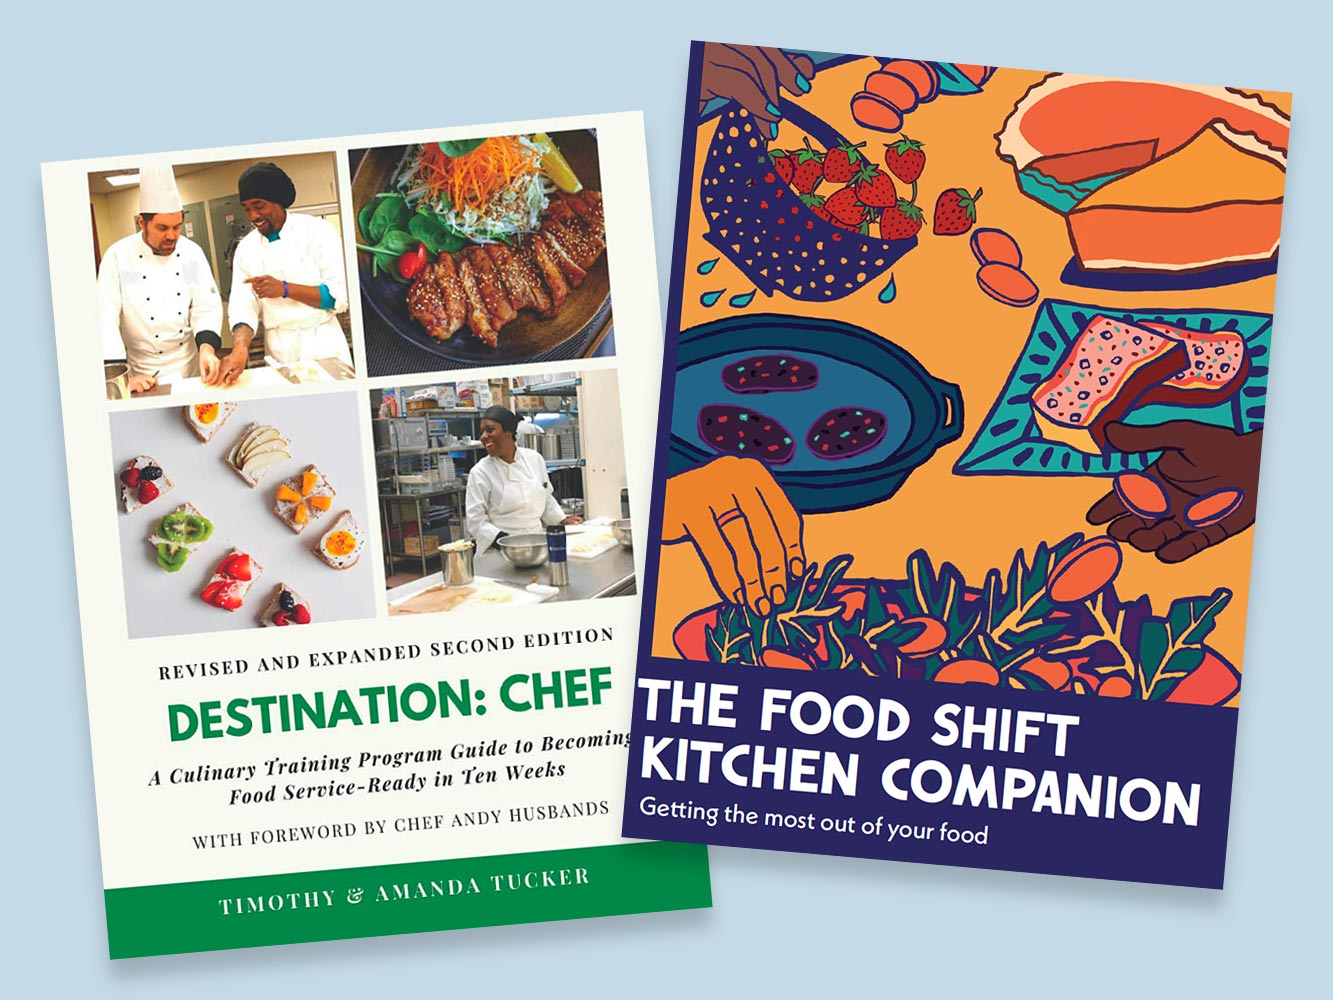 Book covers – Food Shift Kitchen Companion: Getting the Most Out of Your Food and  Destination: Chef - A Culinary Training Program Guide to Becoming Food-Service Ready in Ten Weeks